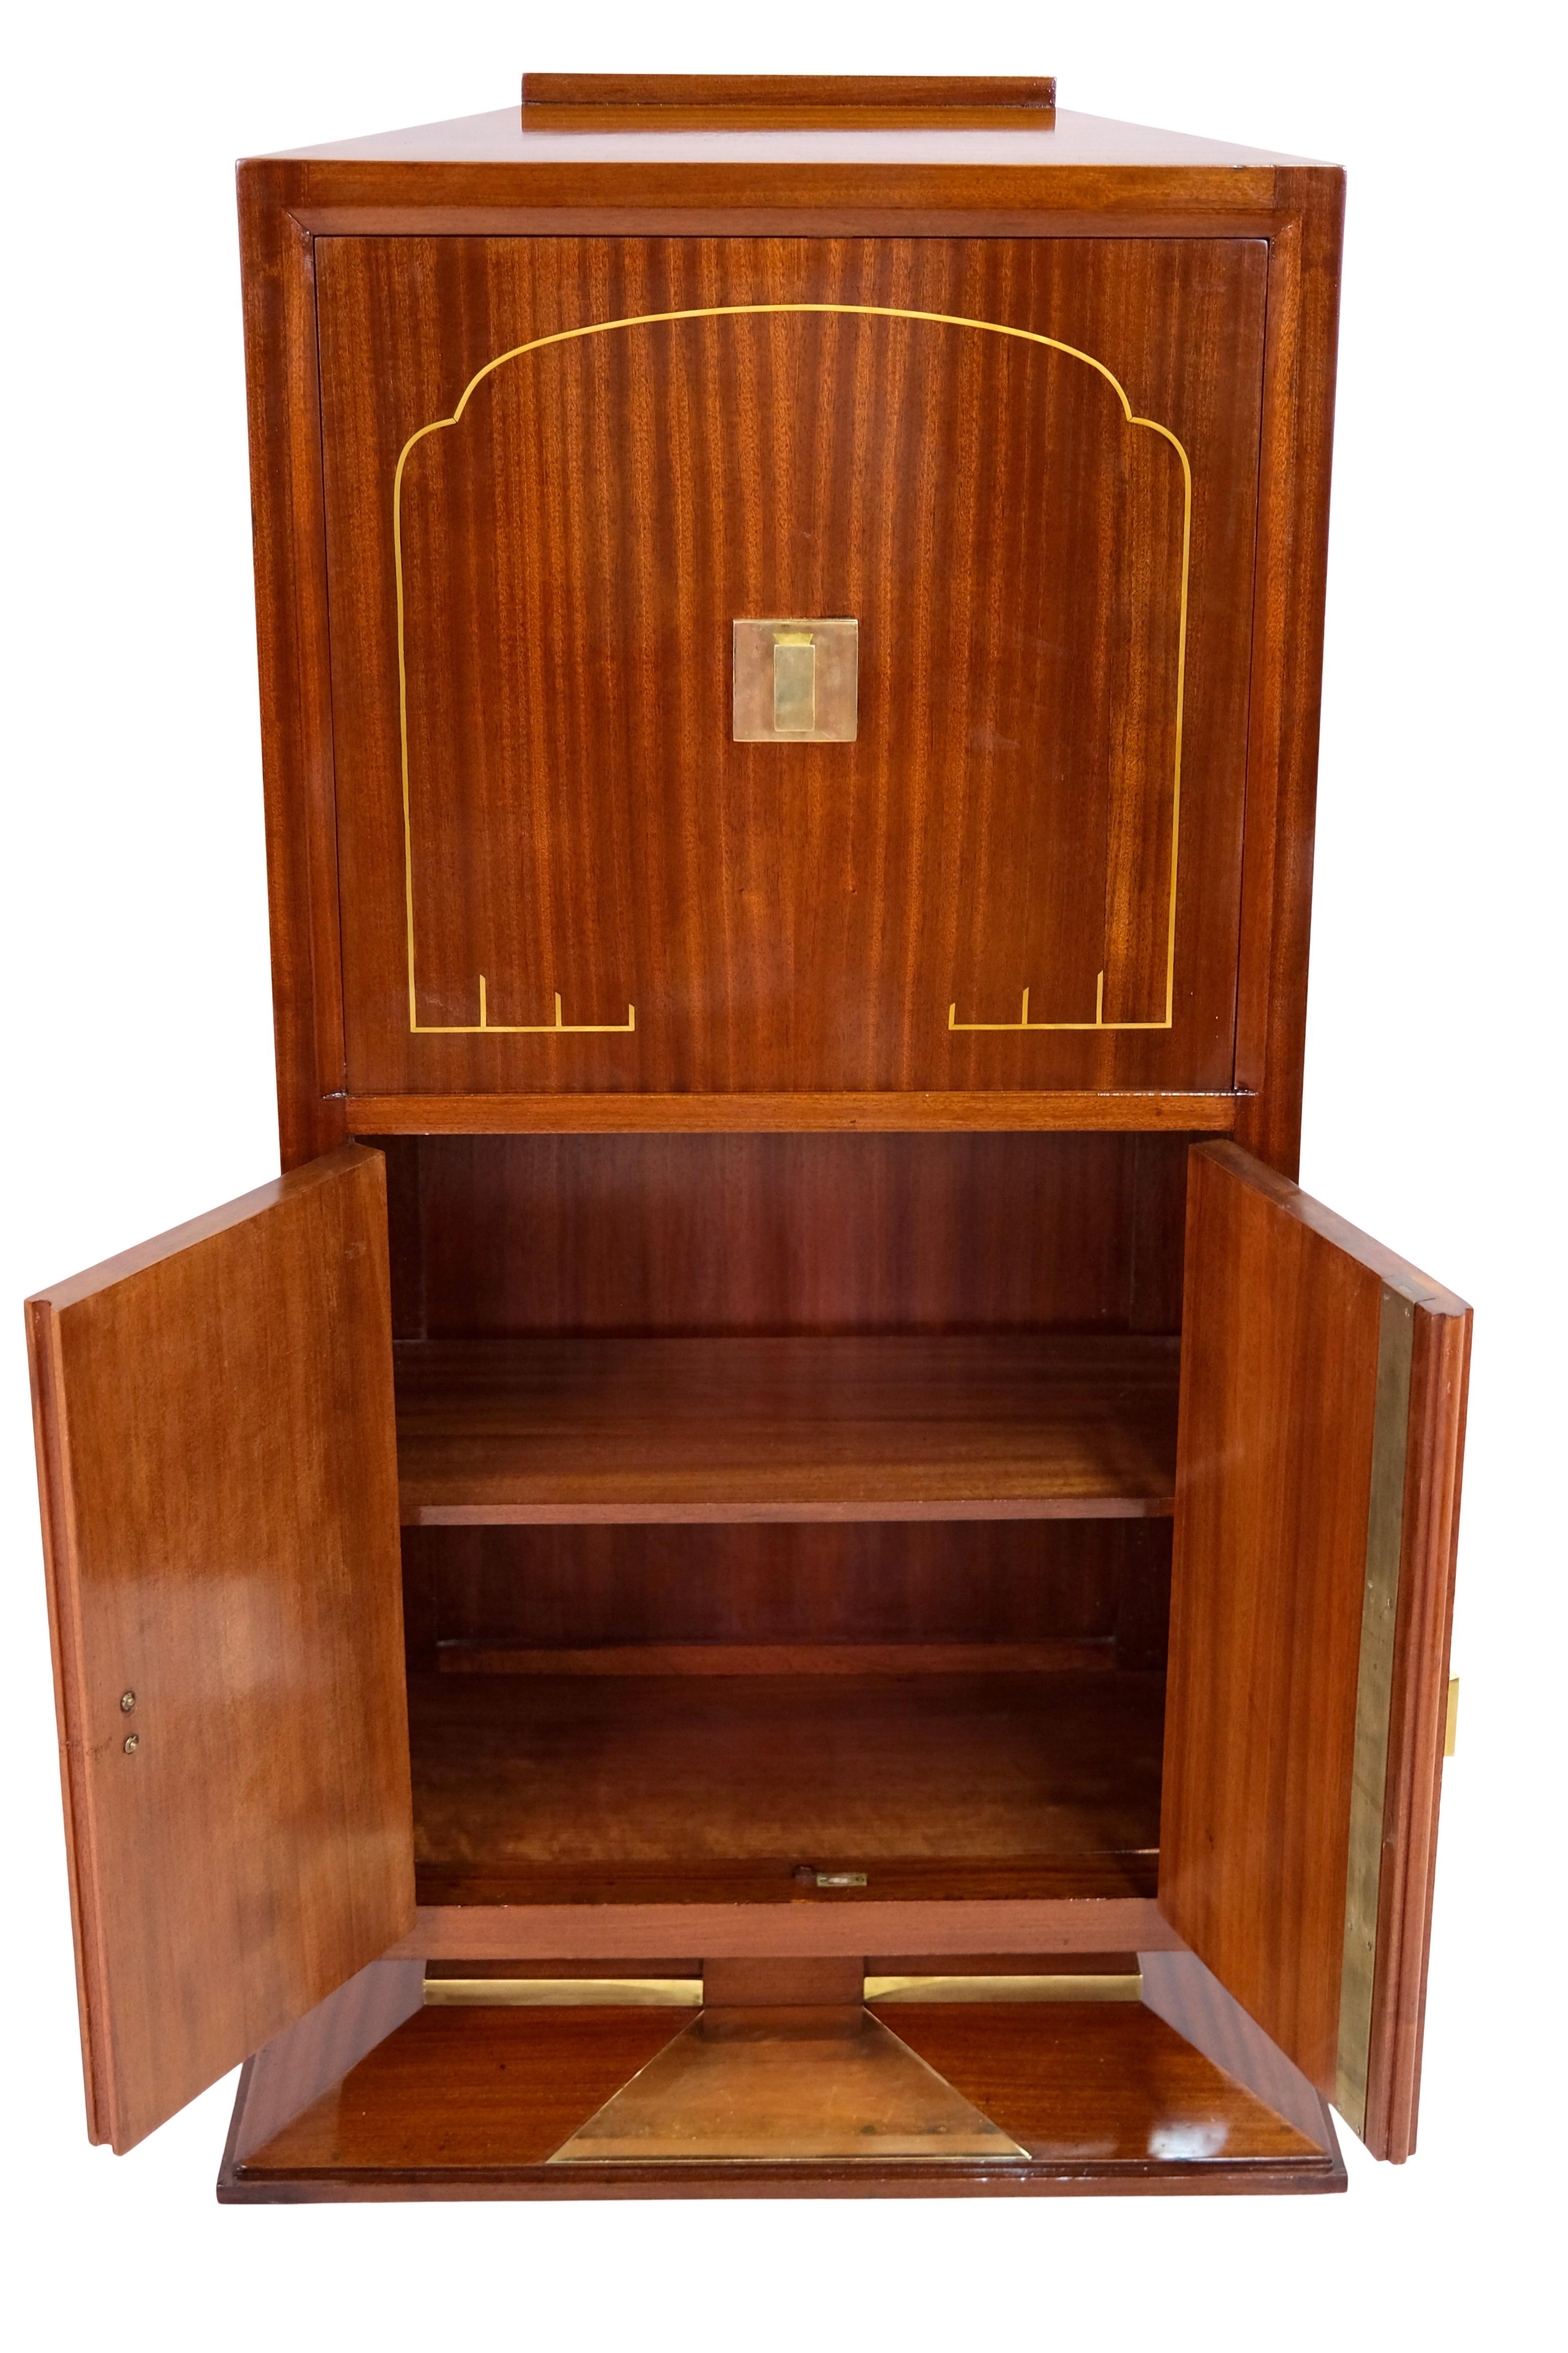 French 1930's Art Deco Dominique Secretaire Desk with Keyhole in the Fitting